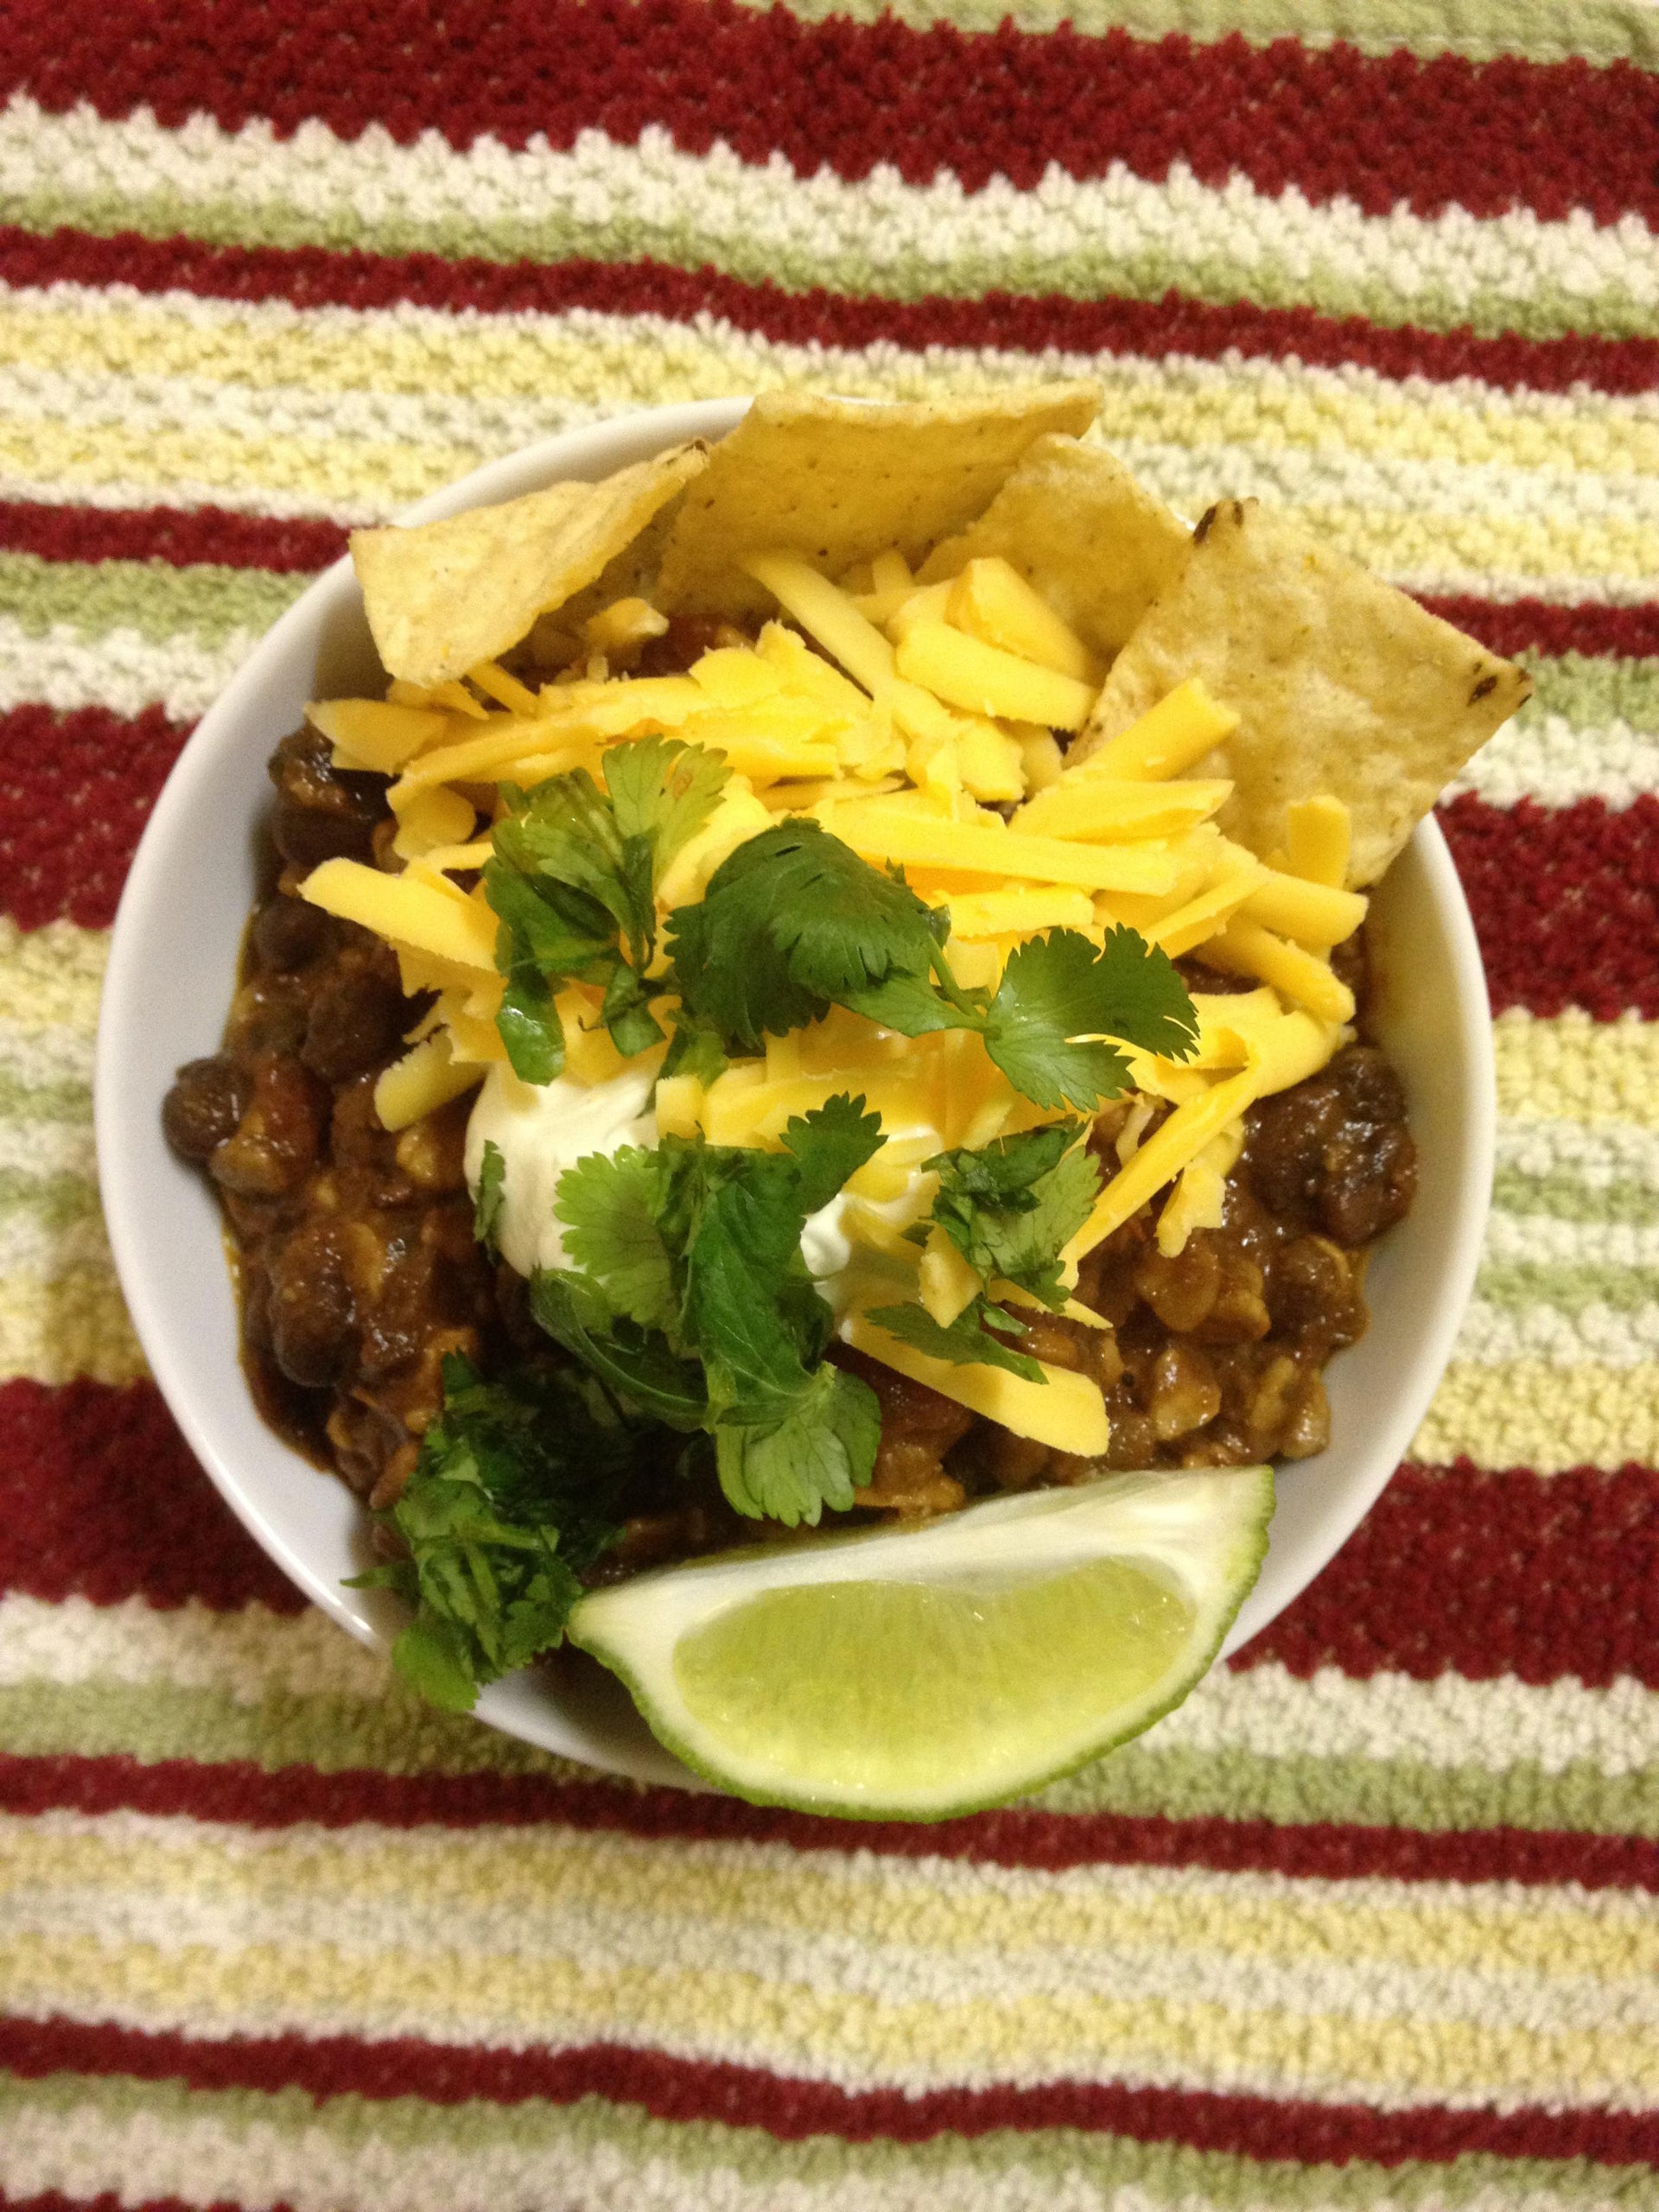 Super Bowl Chili Recipe with Beer, Black Beans, and Chocolate